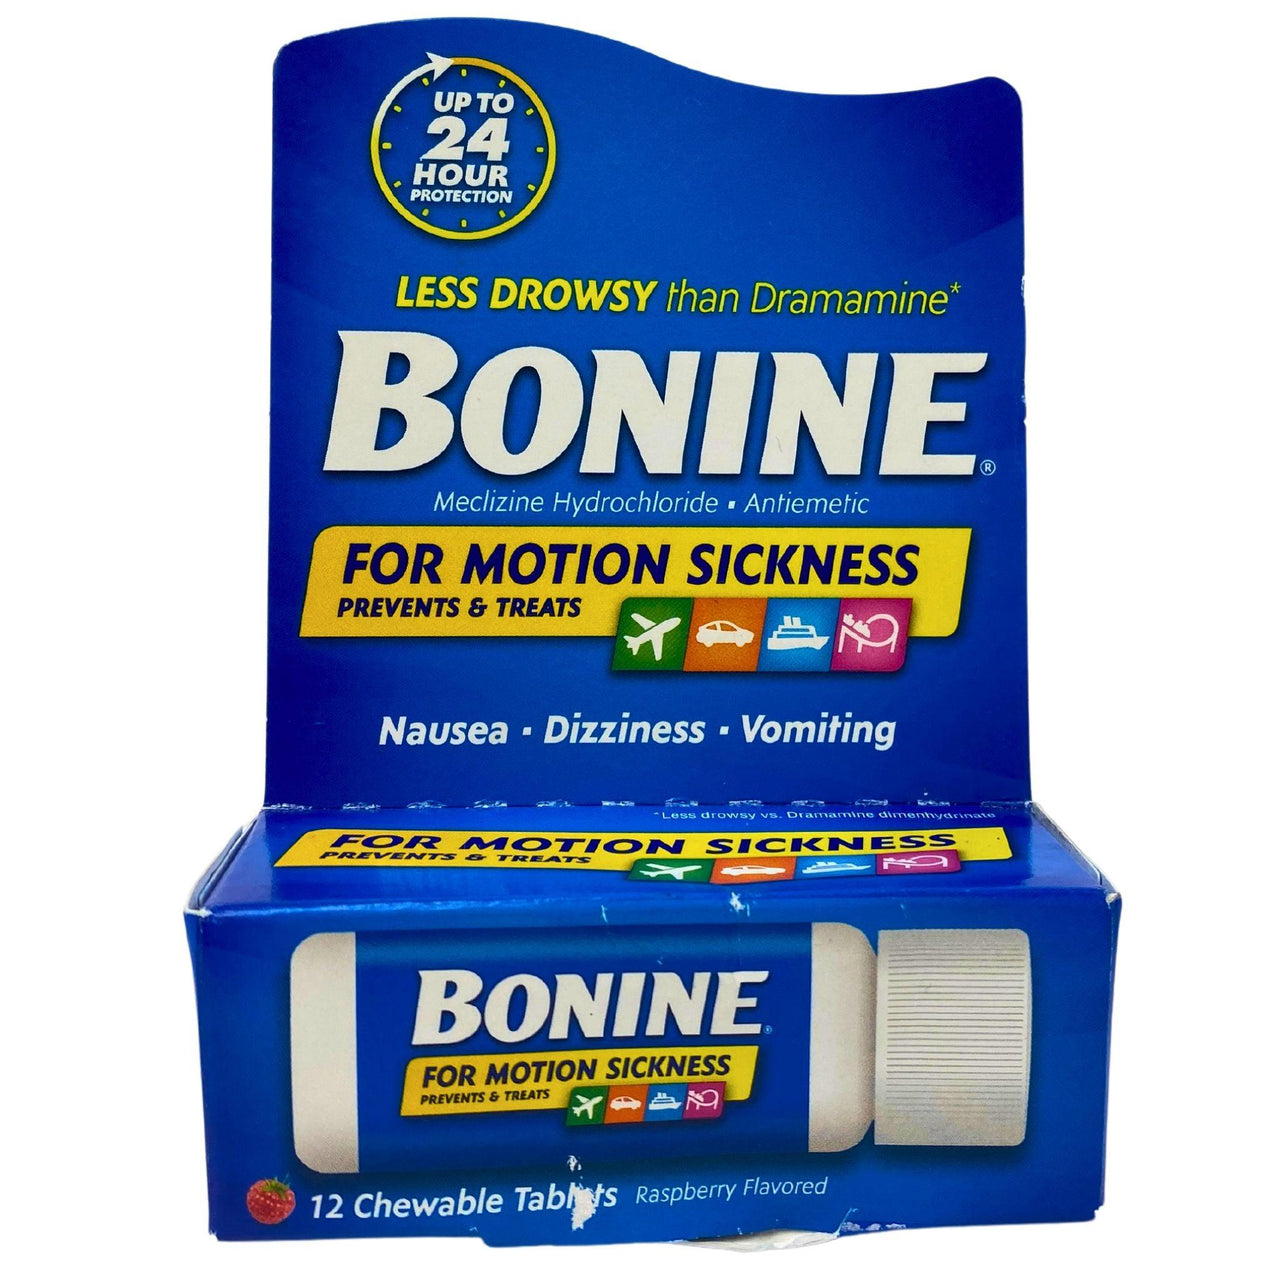 Bonine for Motion Sickness Prevents & Treats Nausea , Dizziness And Vomiting Chewable Tablets (50 Pcs Lot) - Discount Wholesalers Inc